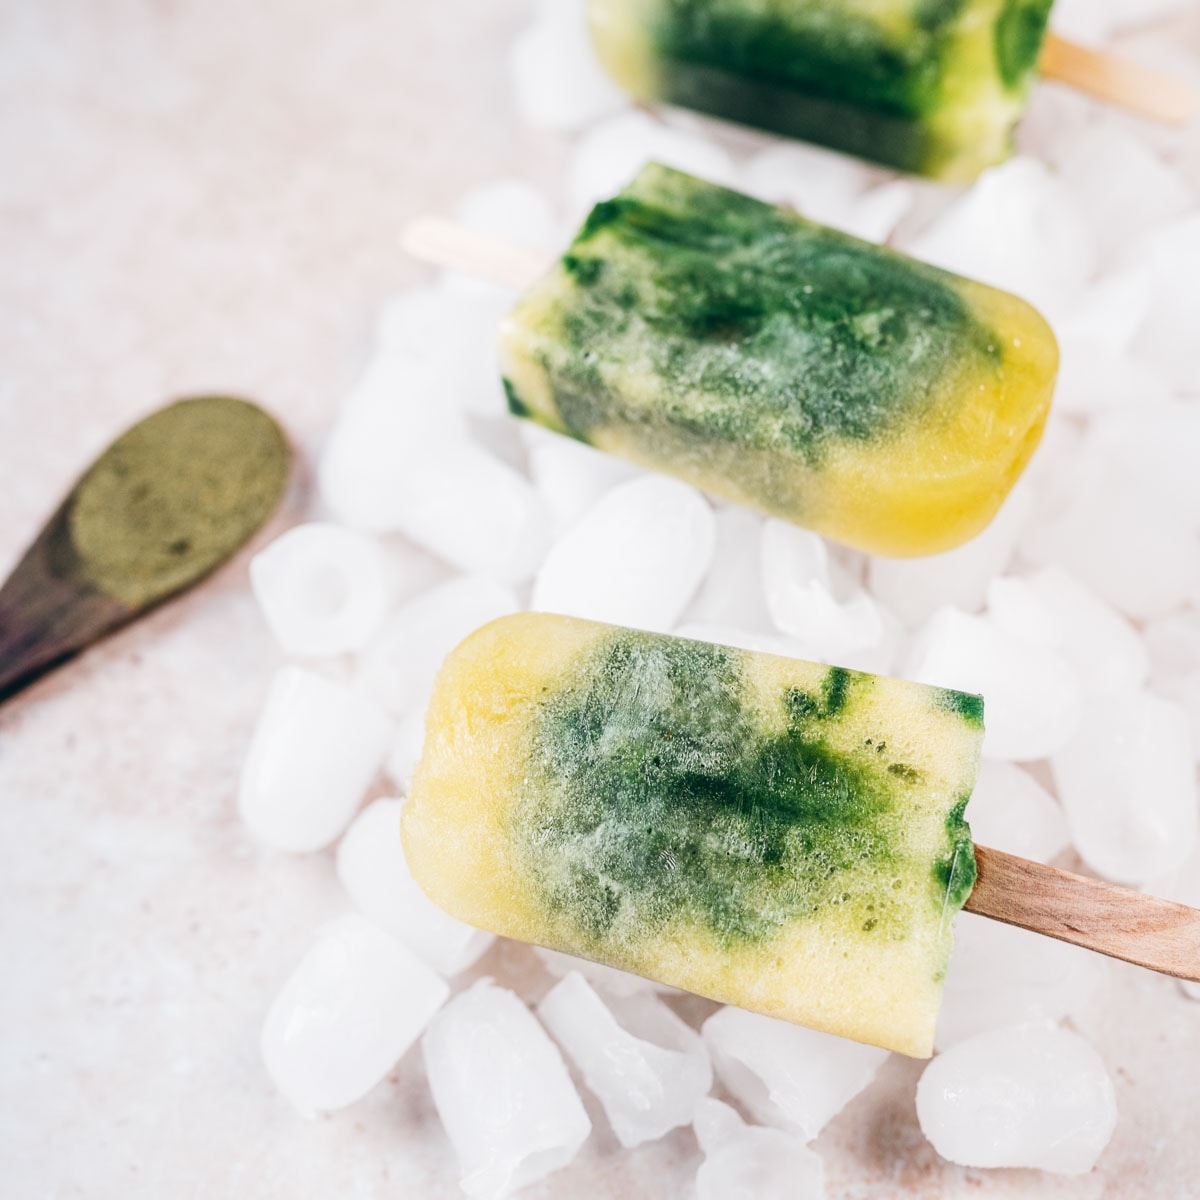 Homemade green and yellow popsicles resting on ice cubes.